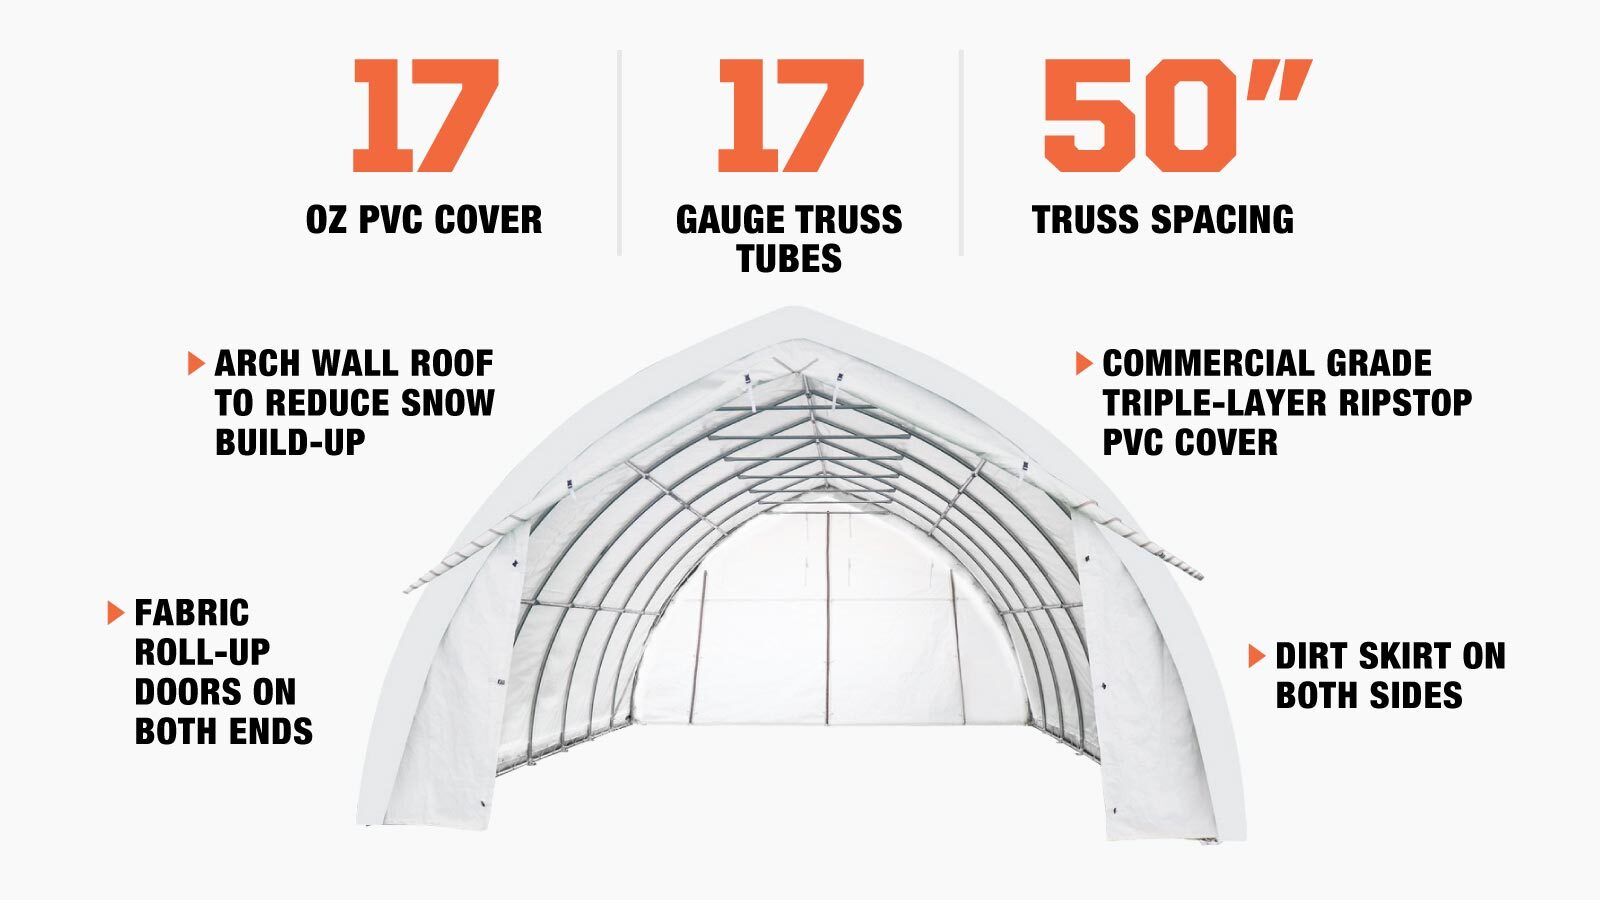 TMG Industrial 20' x 30' Arch Wall Peak Ceiling Storage Shelter with Heavy Duty 17 oz PVC Cover & Drive Through Doors, TMG-ST2031PV(Previously ST2030PV)-description-image